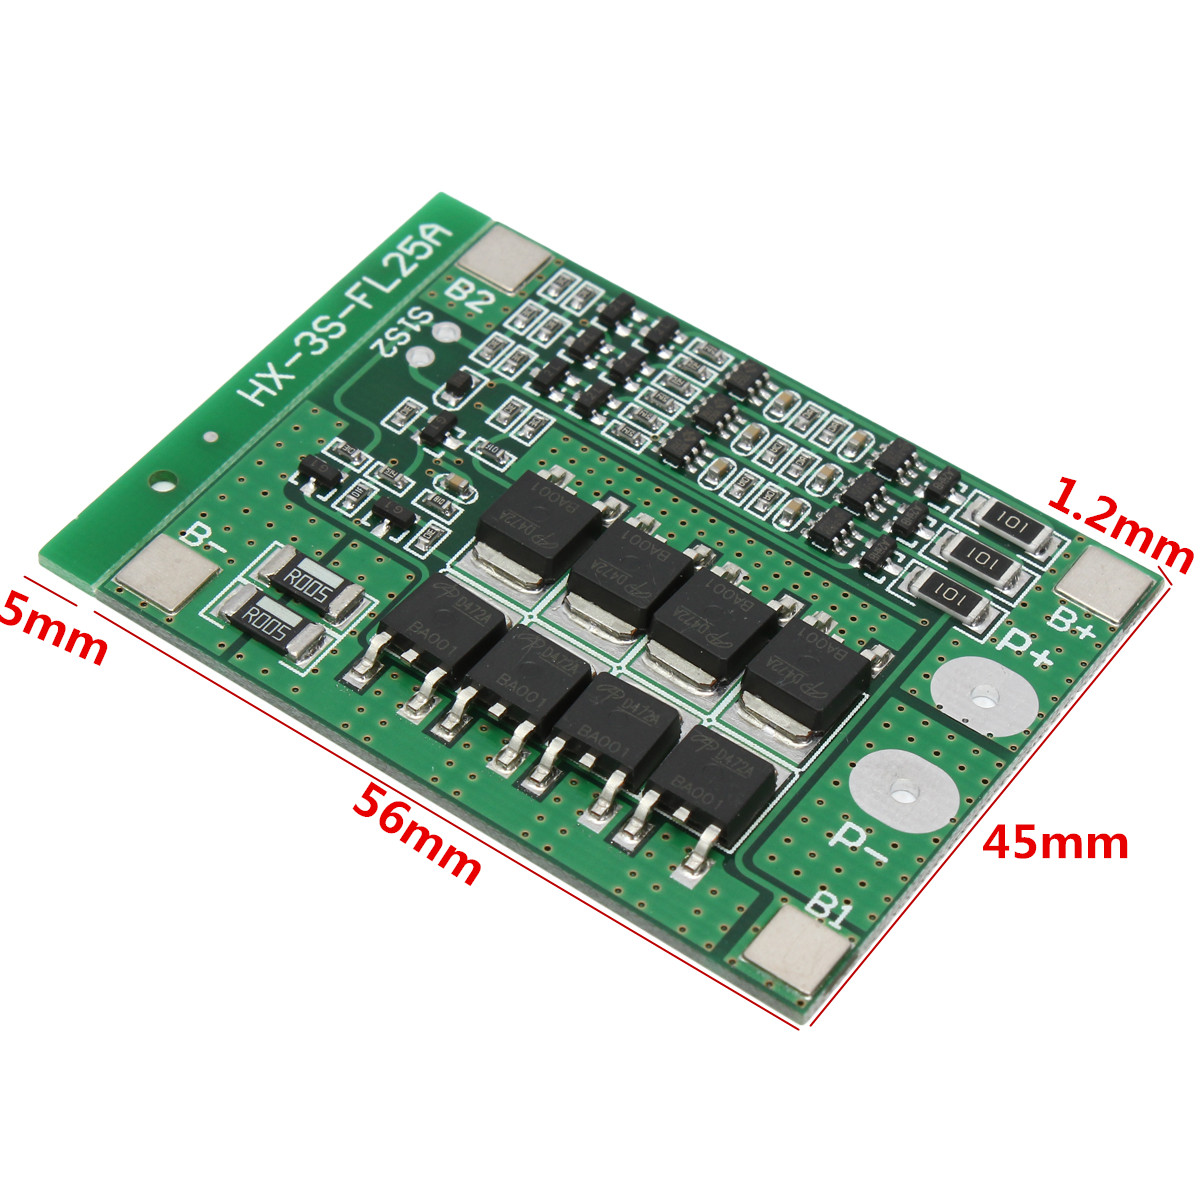 20pcs-3S-111V-25A-18650-Li-ion-Lithium-Battery-BMS-Protection-PCB-Board-With-Balance-Function-1388423